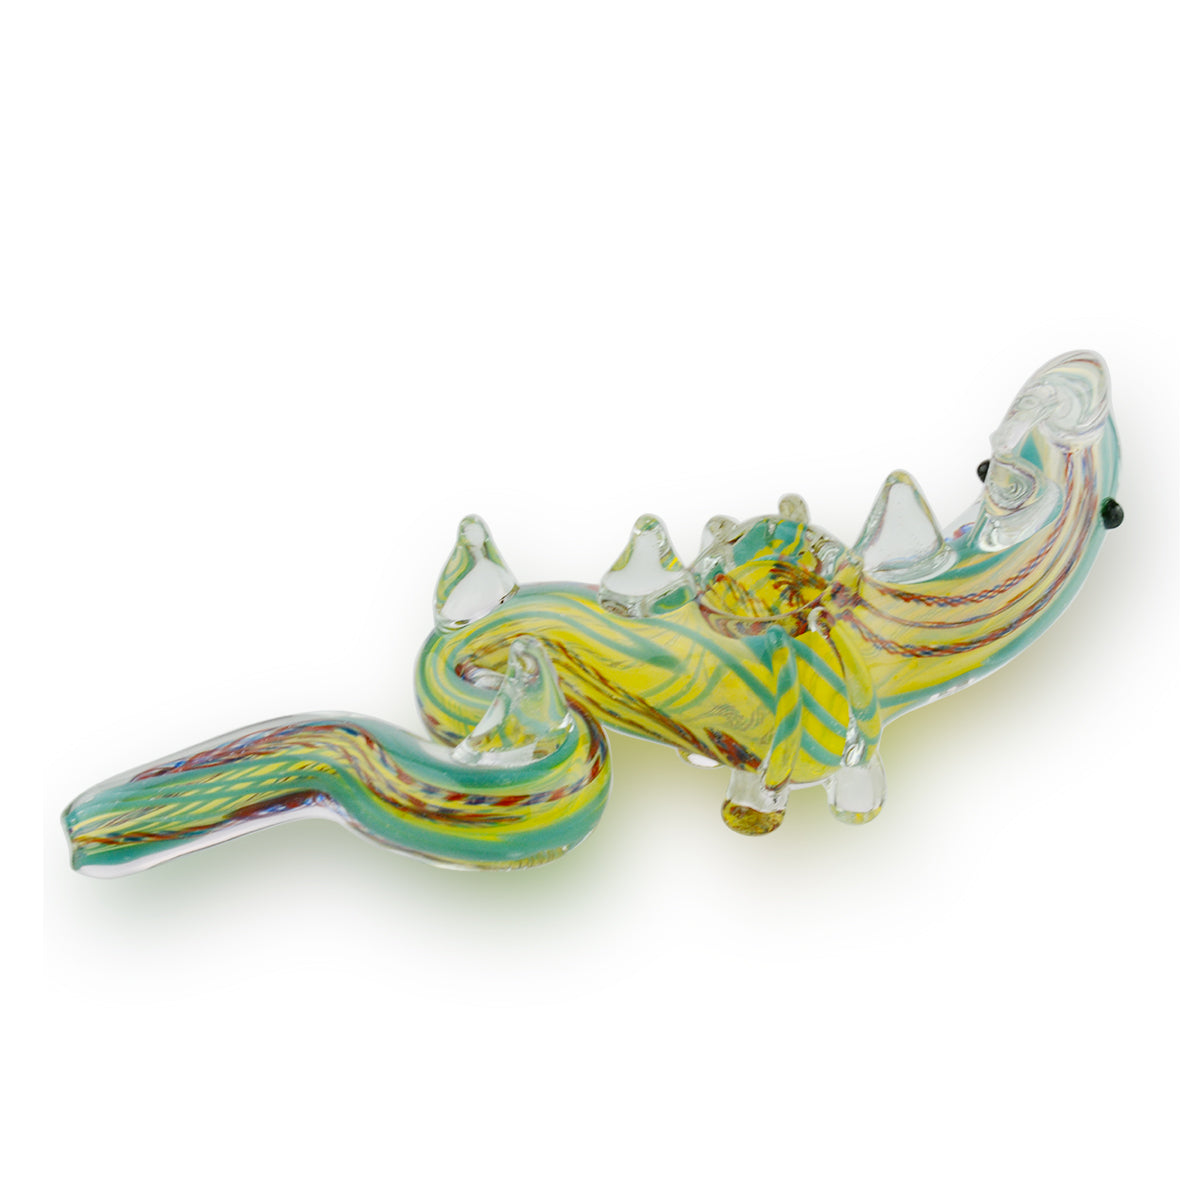 5" Dragon Hand Pipe Inside Color Lining Approx 95 Grams - LA Wholesale Kings